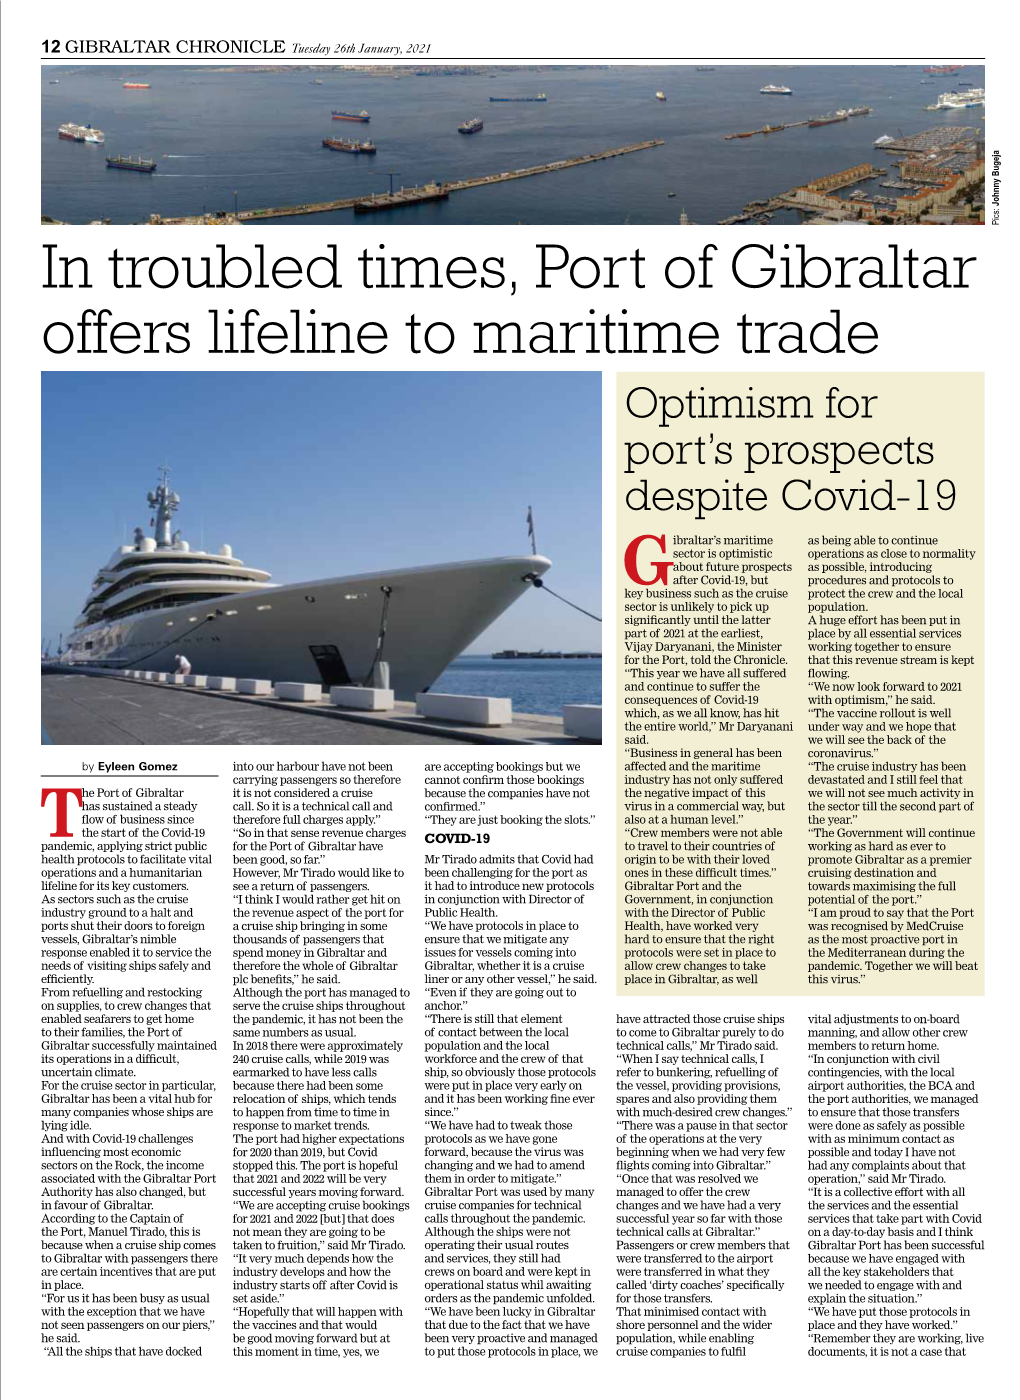 In Troubled Times, Port of Gibraltar Offers Lifeline to Maritime Trade